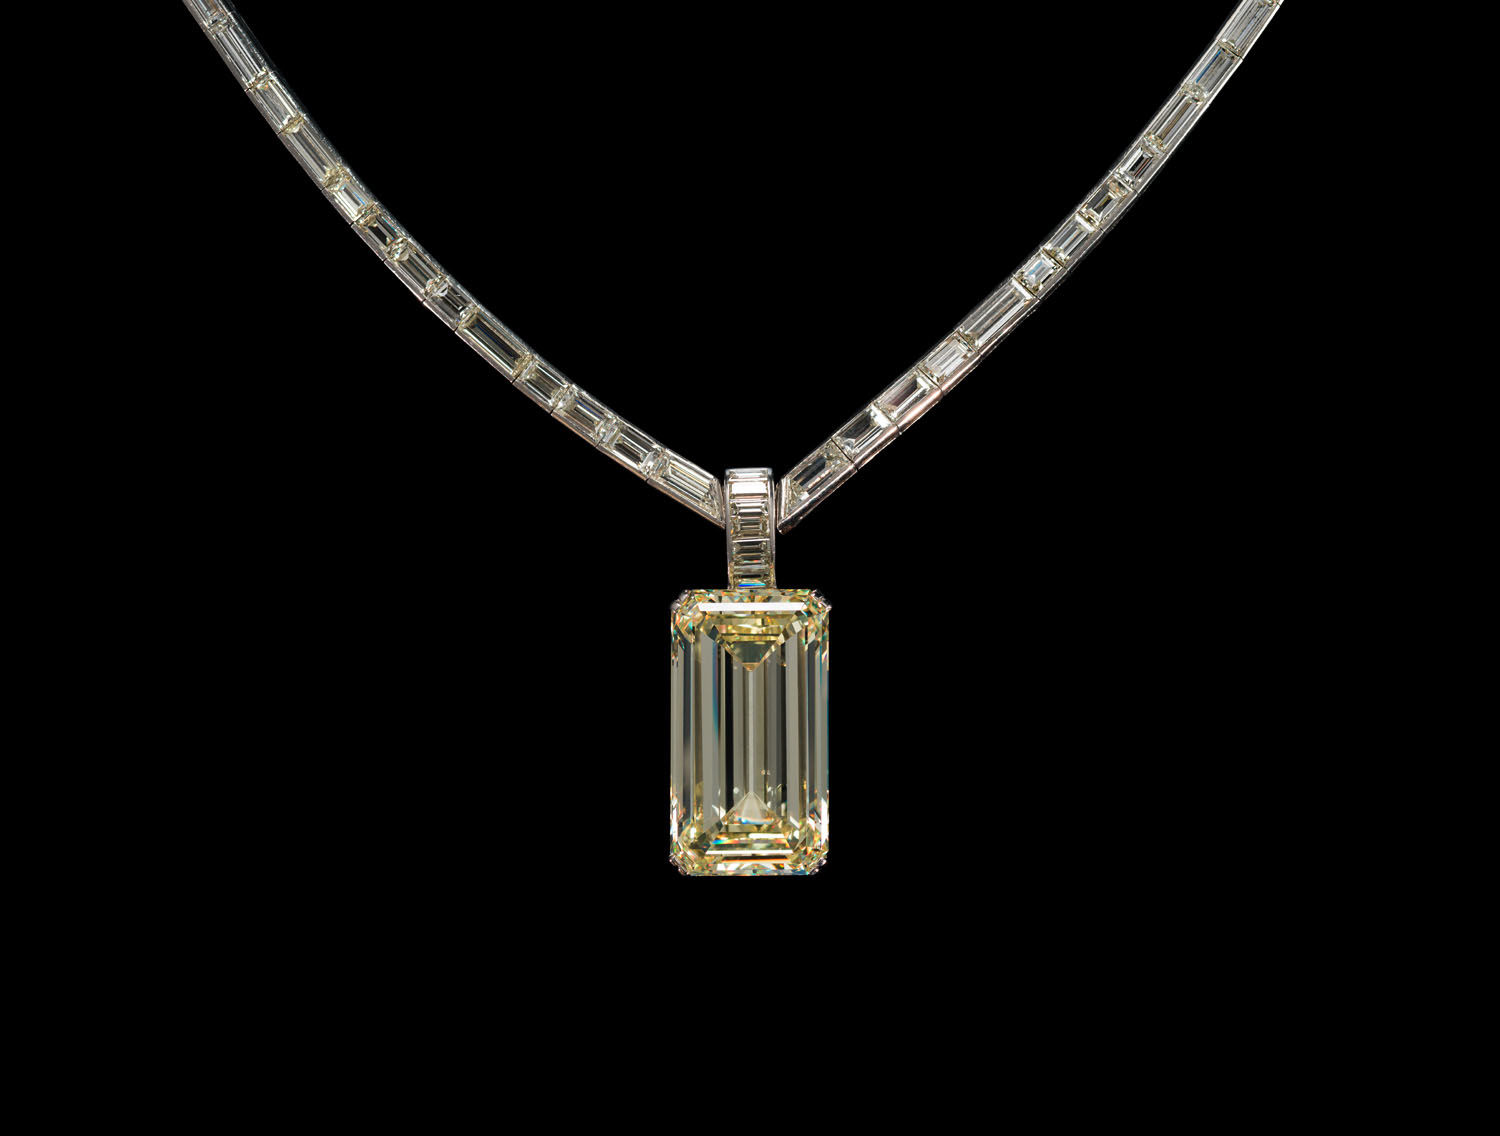 Kimberley Diamond set in a necklace